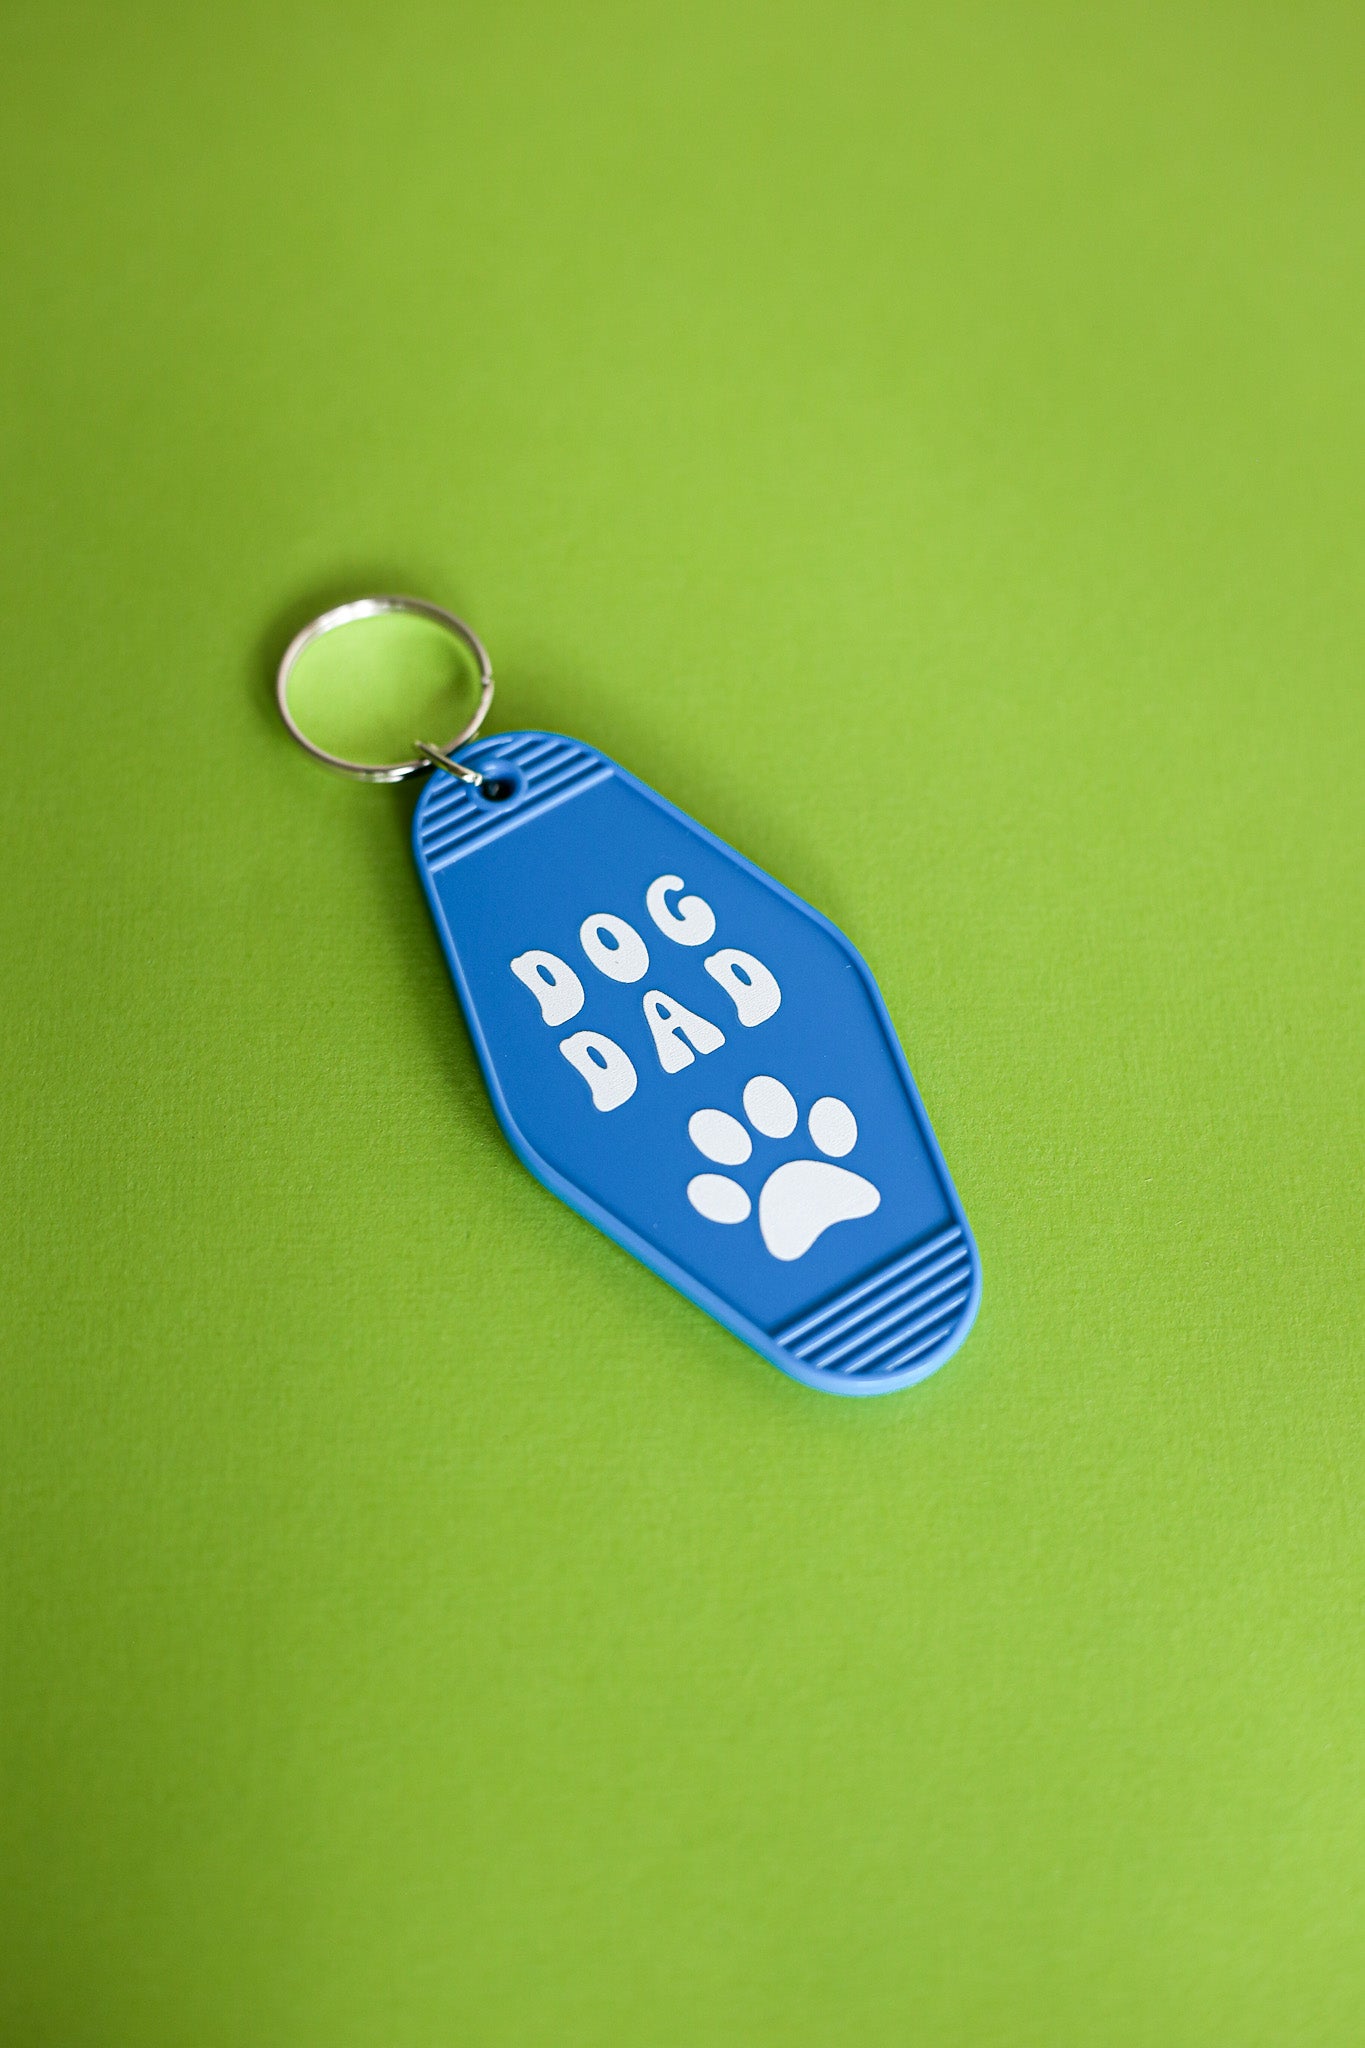 Vintage-Inspired Motel Key Chains | Assorted Designs